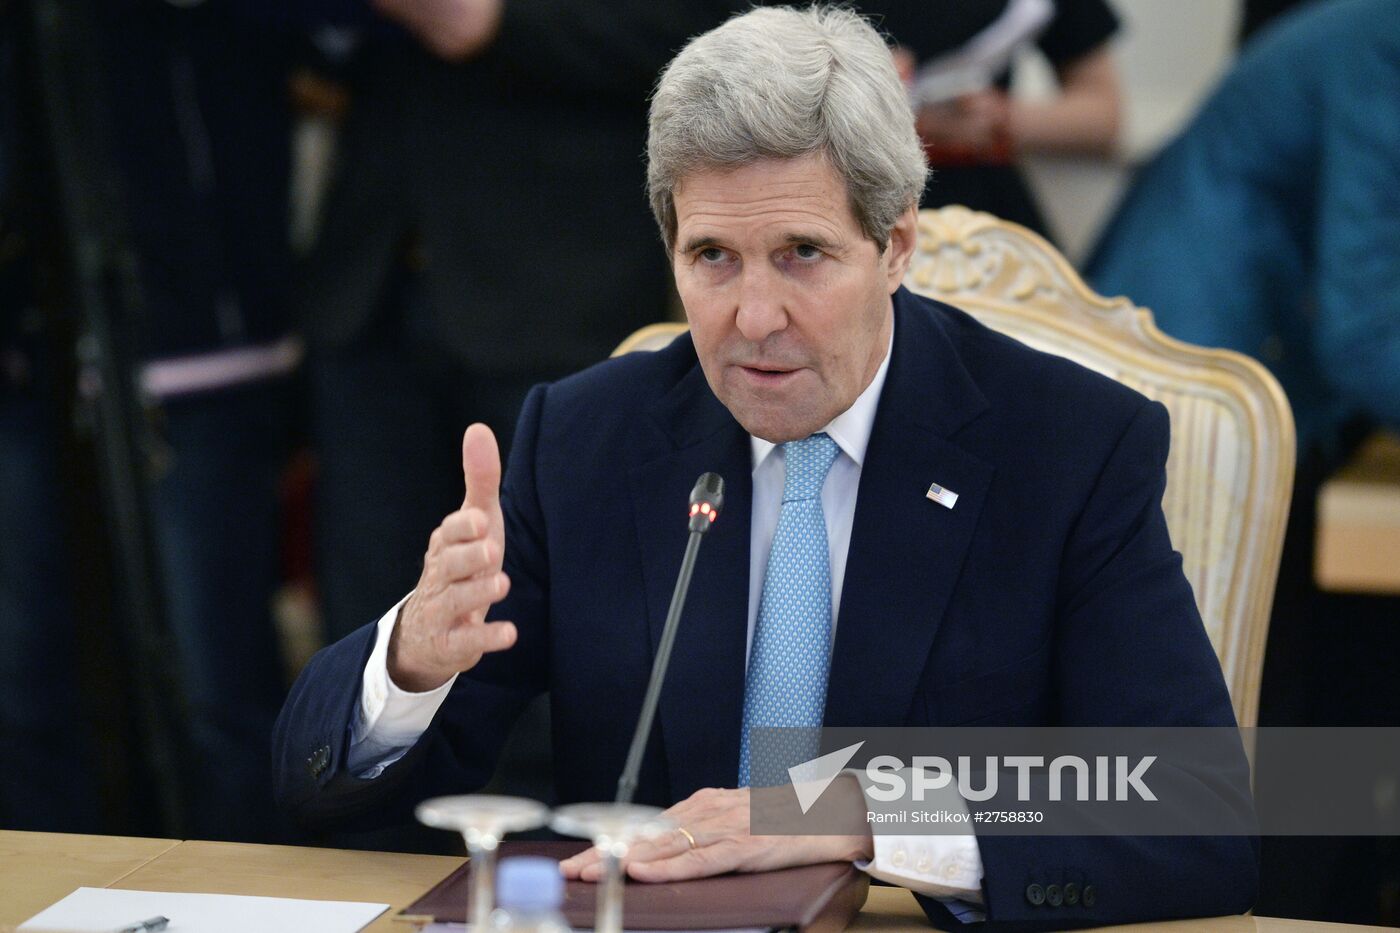 Russian Foreign Minister Sergey Lavrov meets with US Secretary of State John Kerry